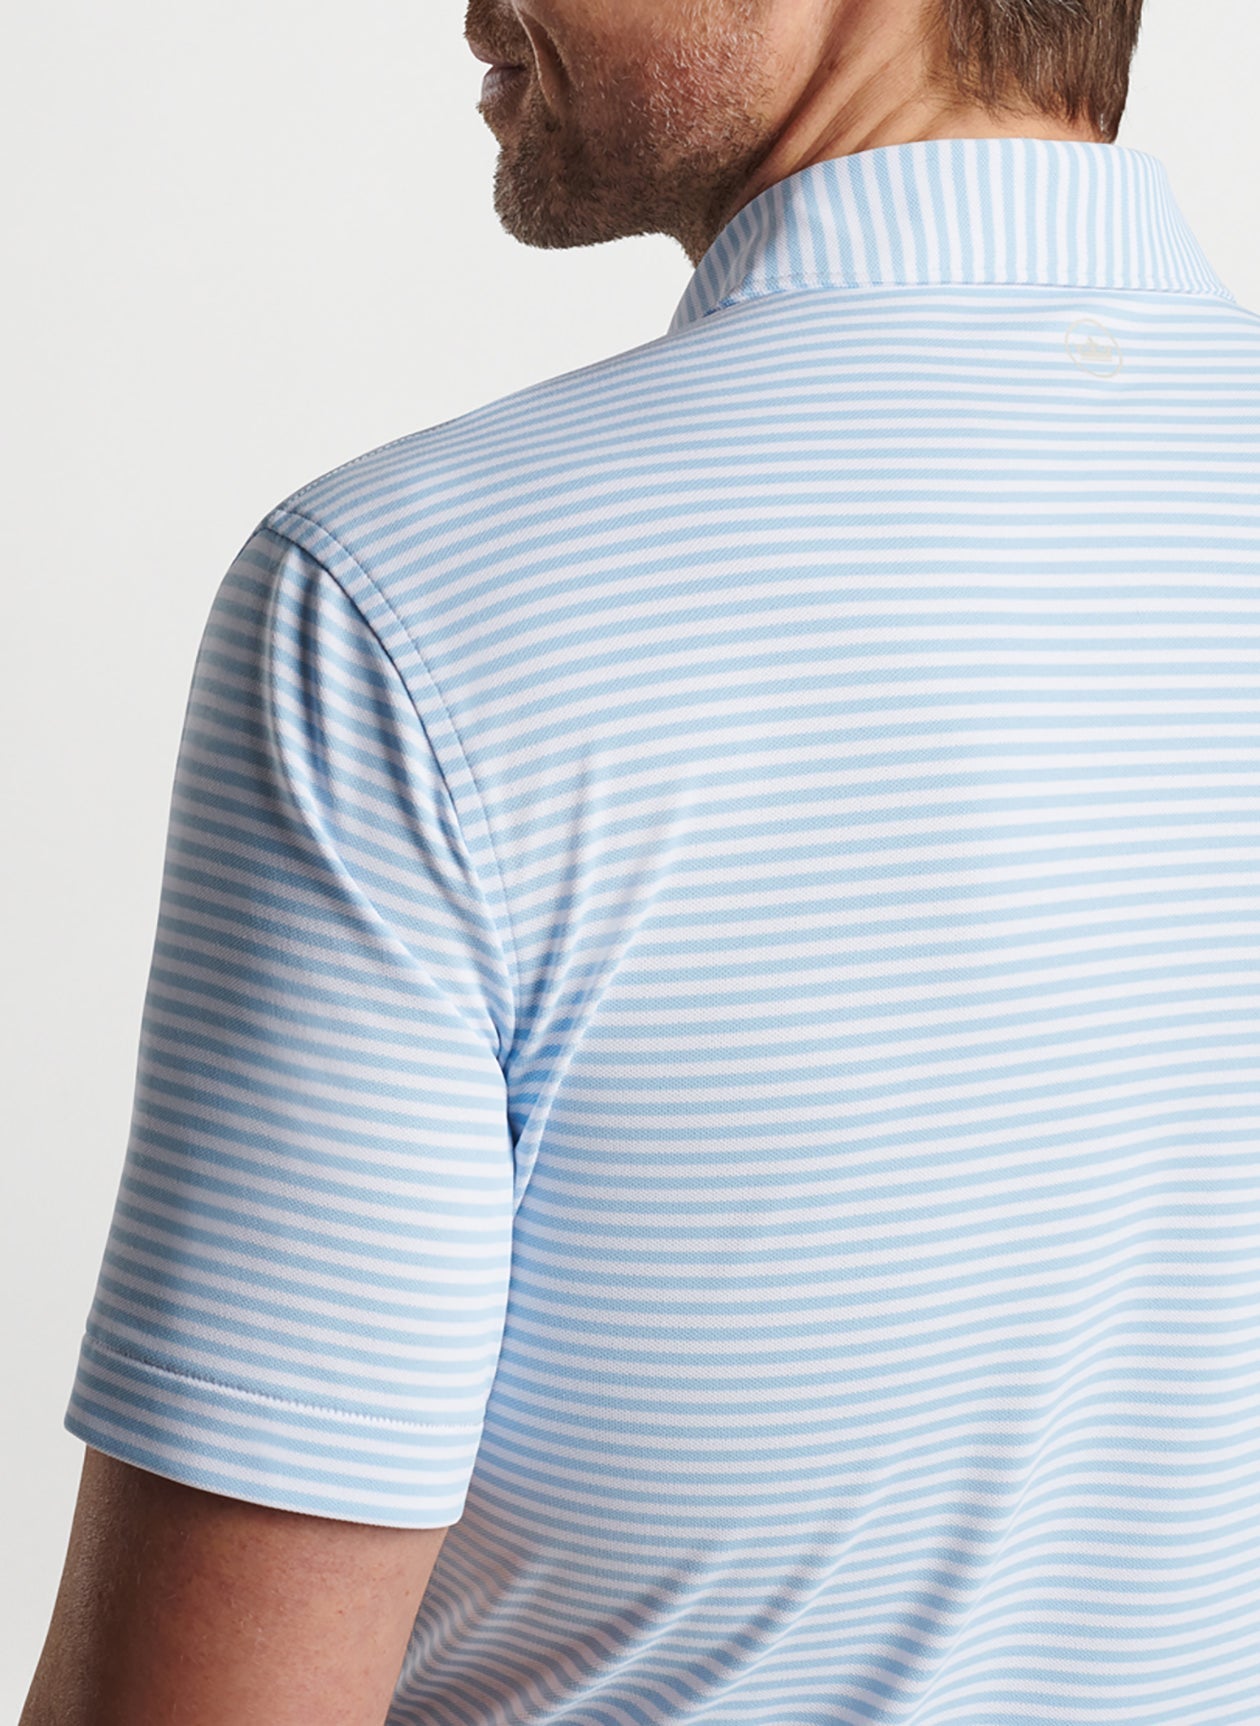 Peter Millar Mood Performance Mesh Customized Polos, Blue Frost